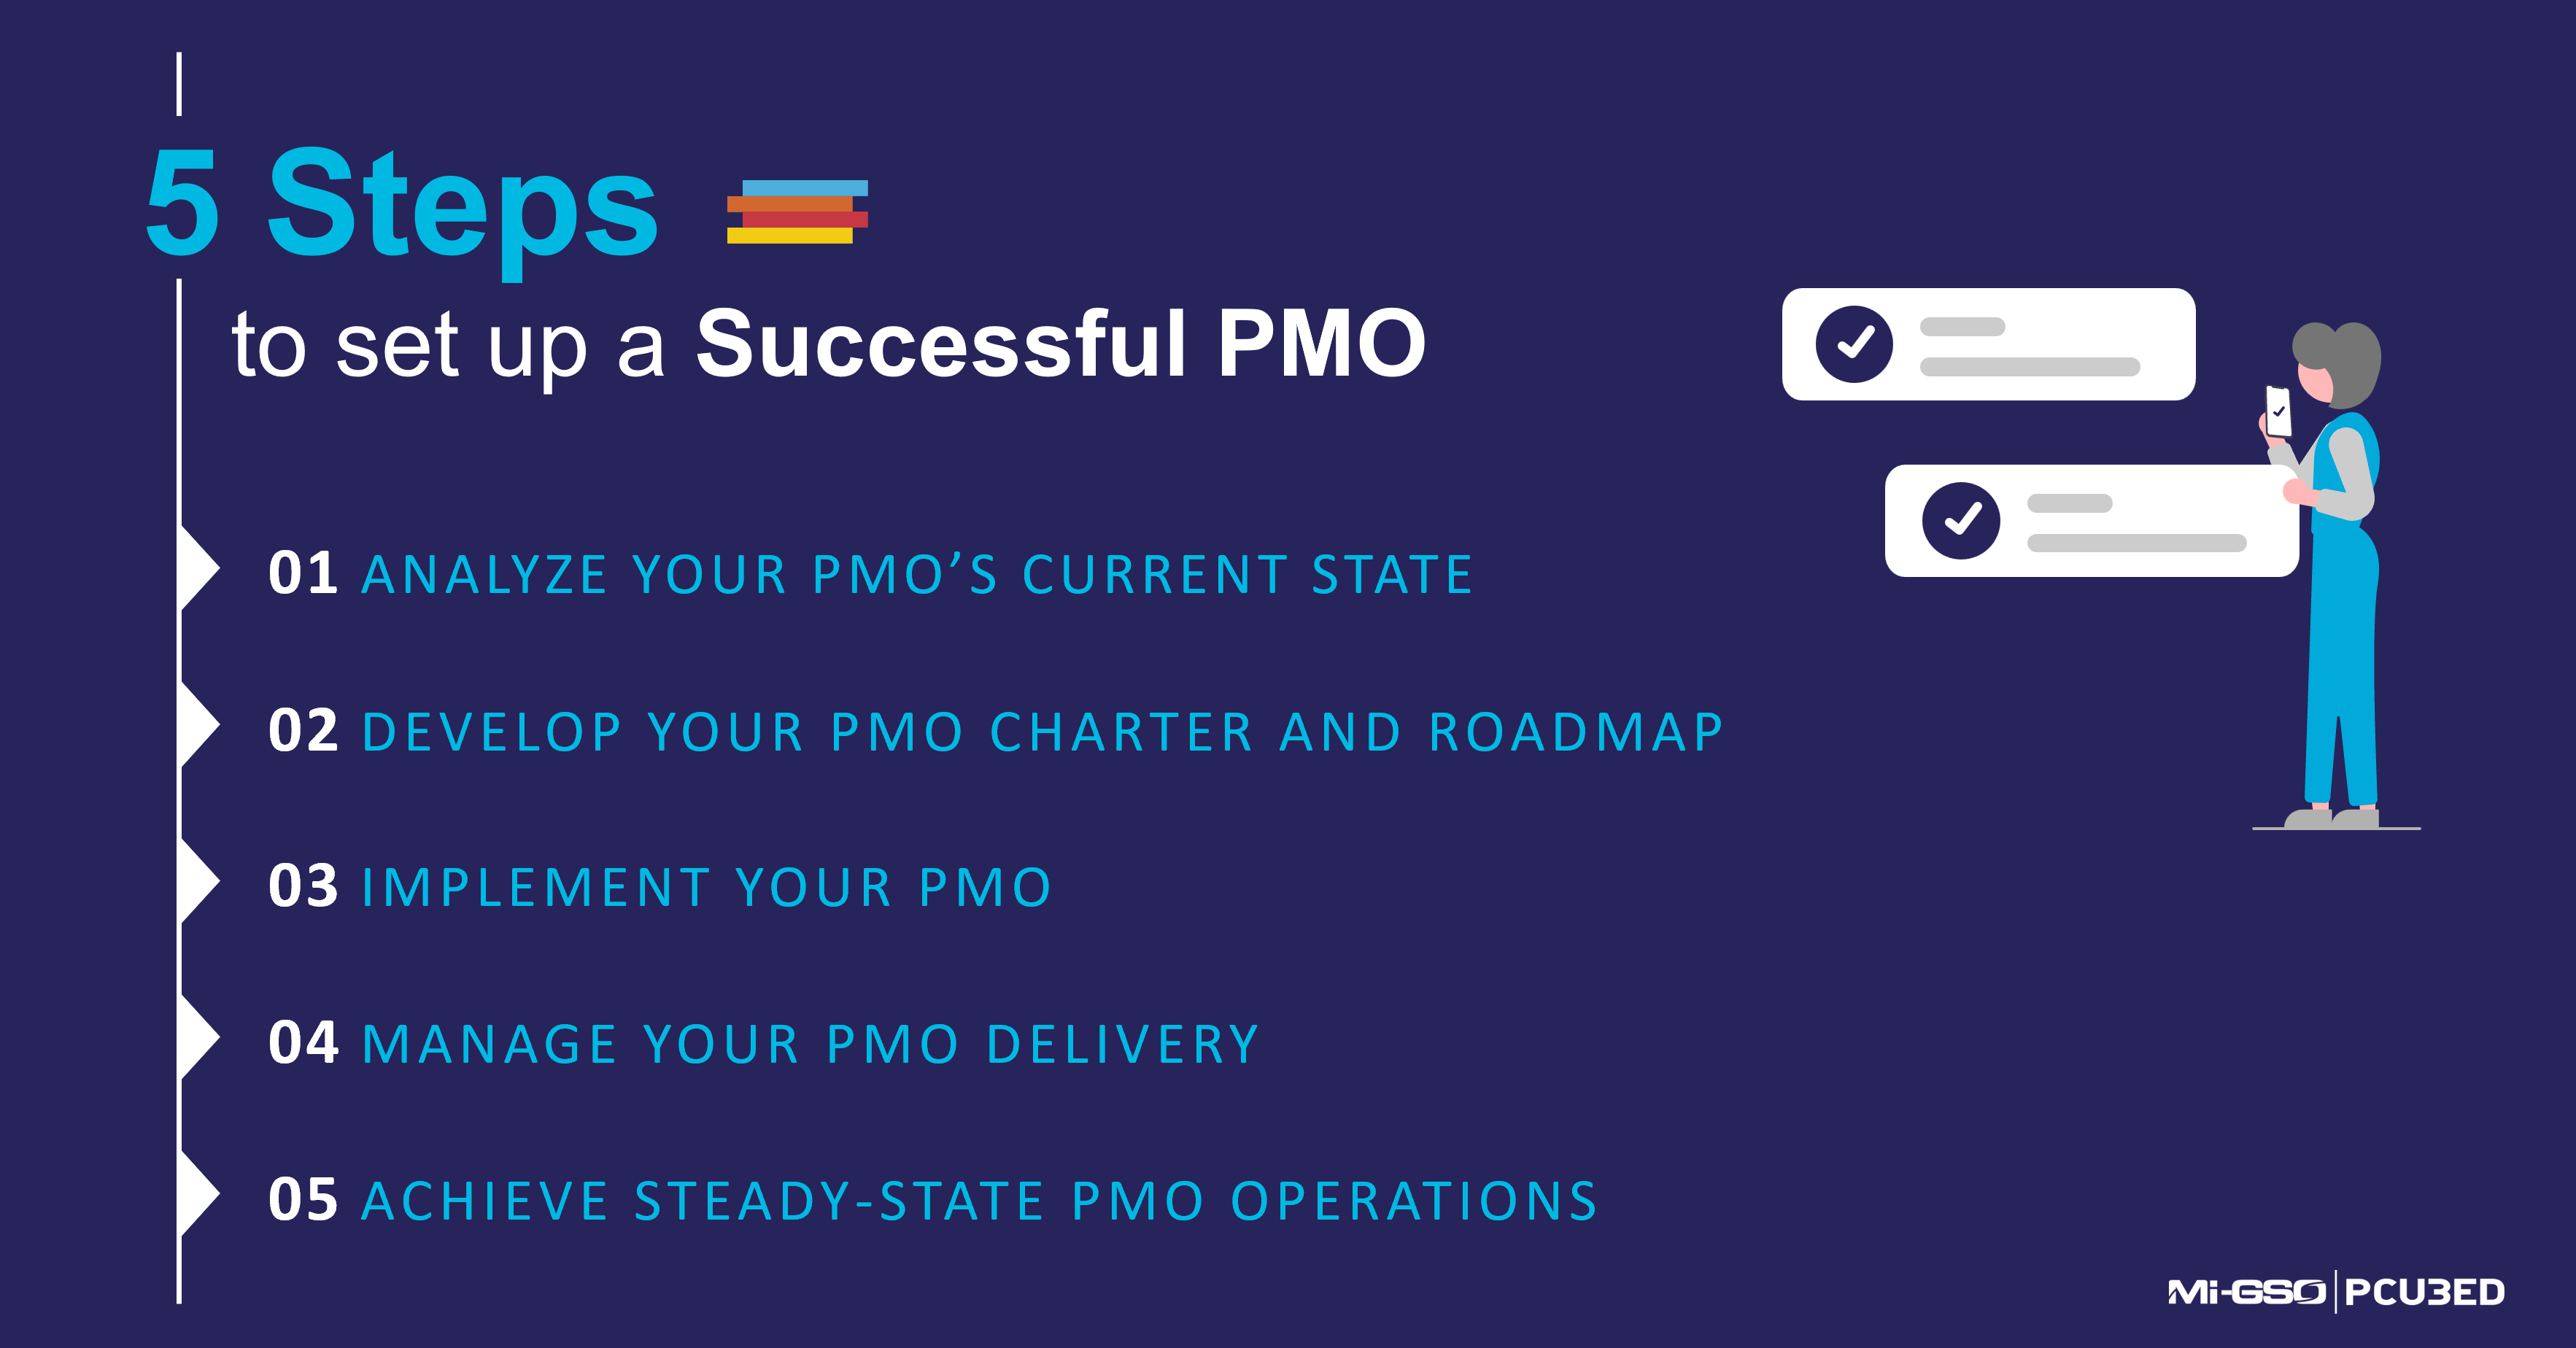 a text infographic with the 5 steps to set up a PMO listed